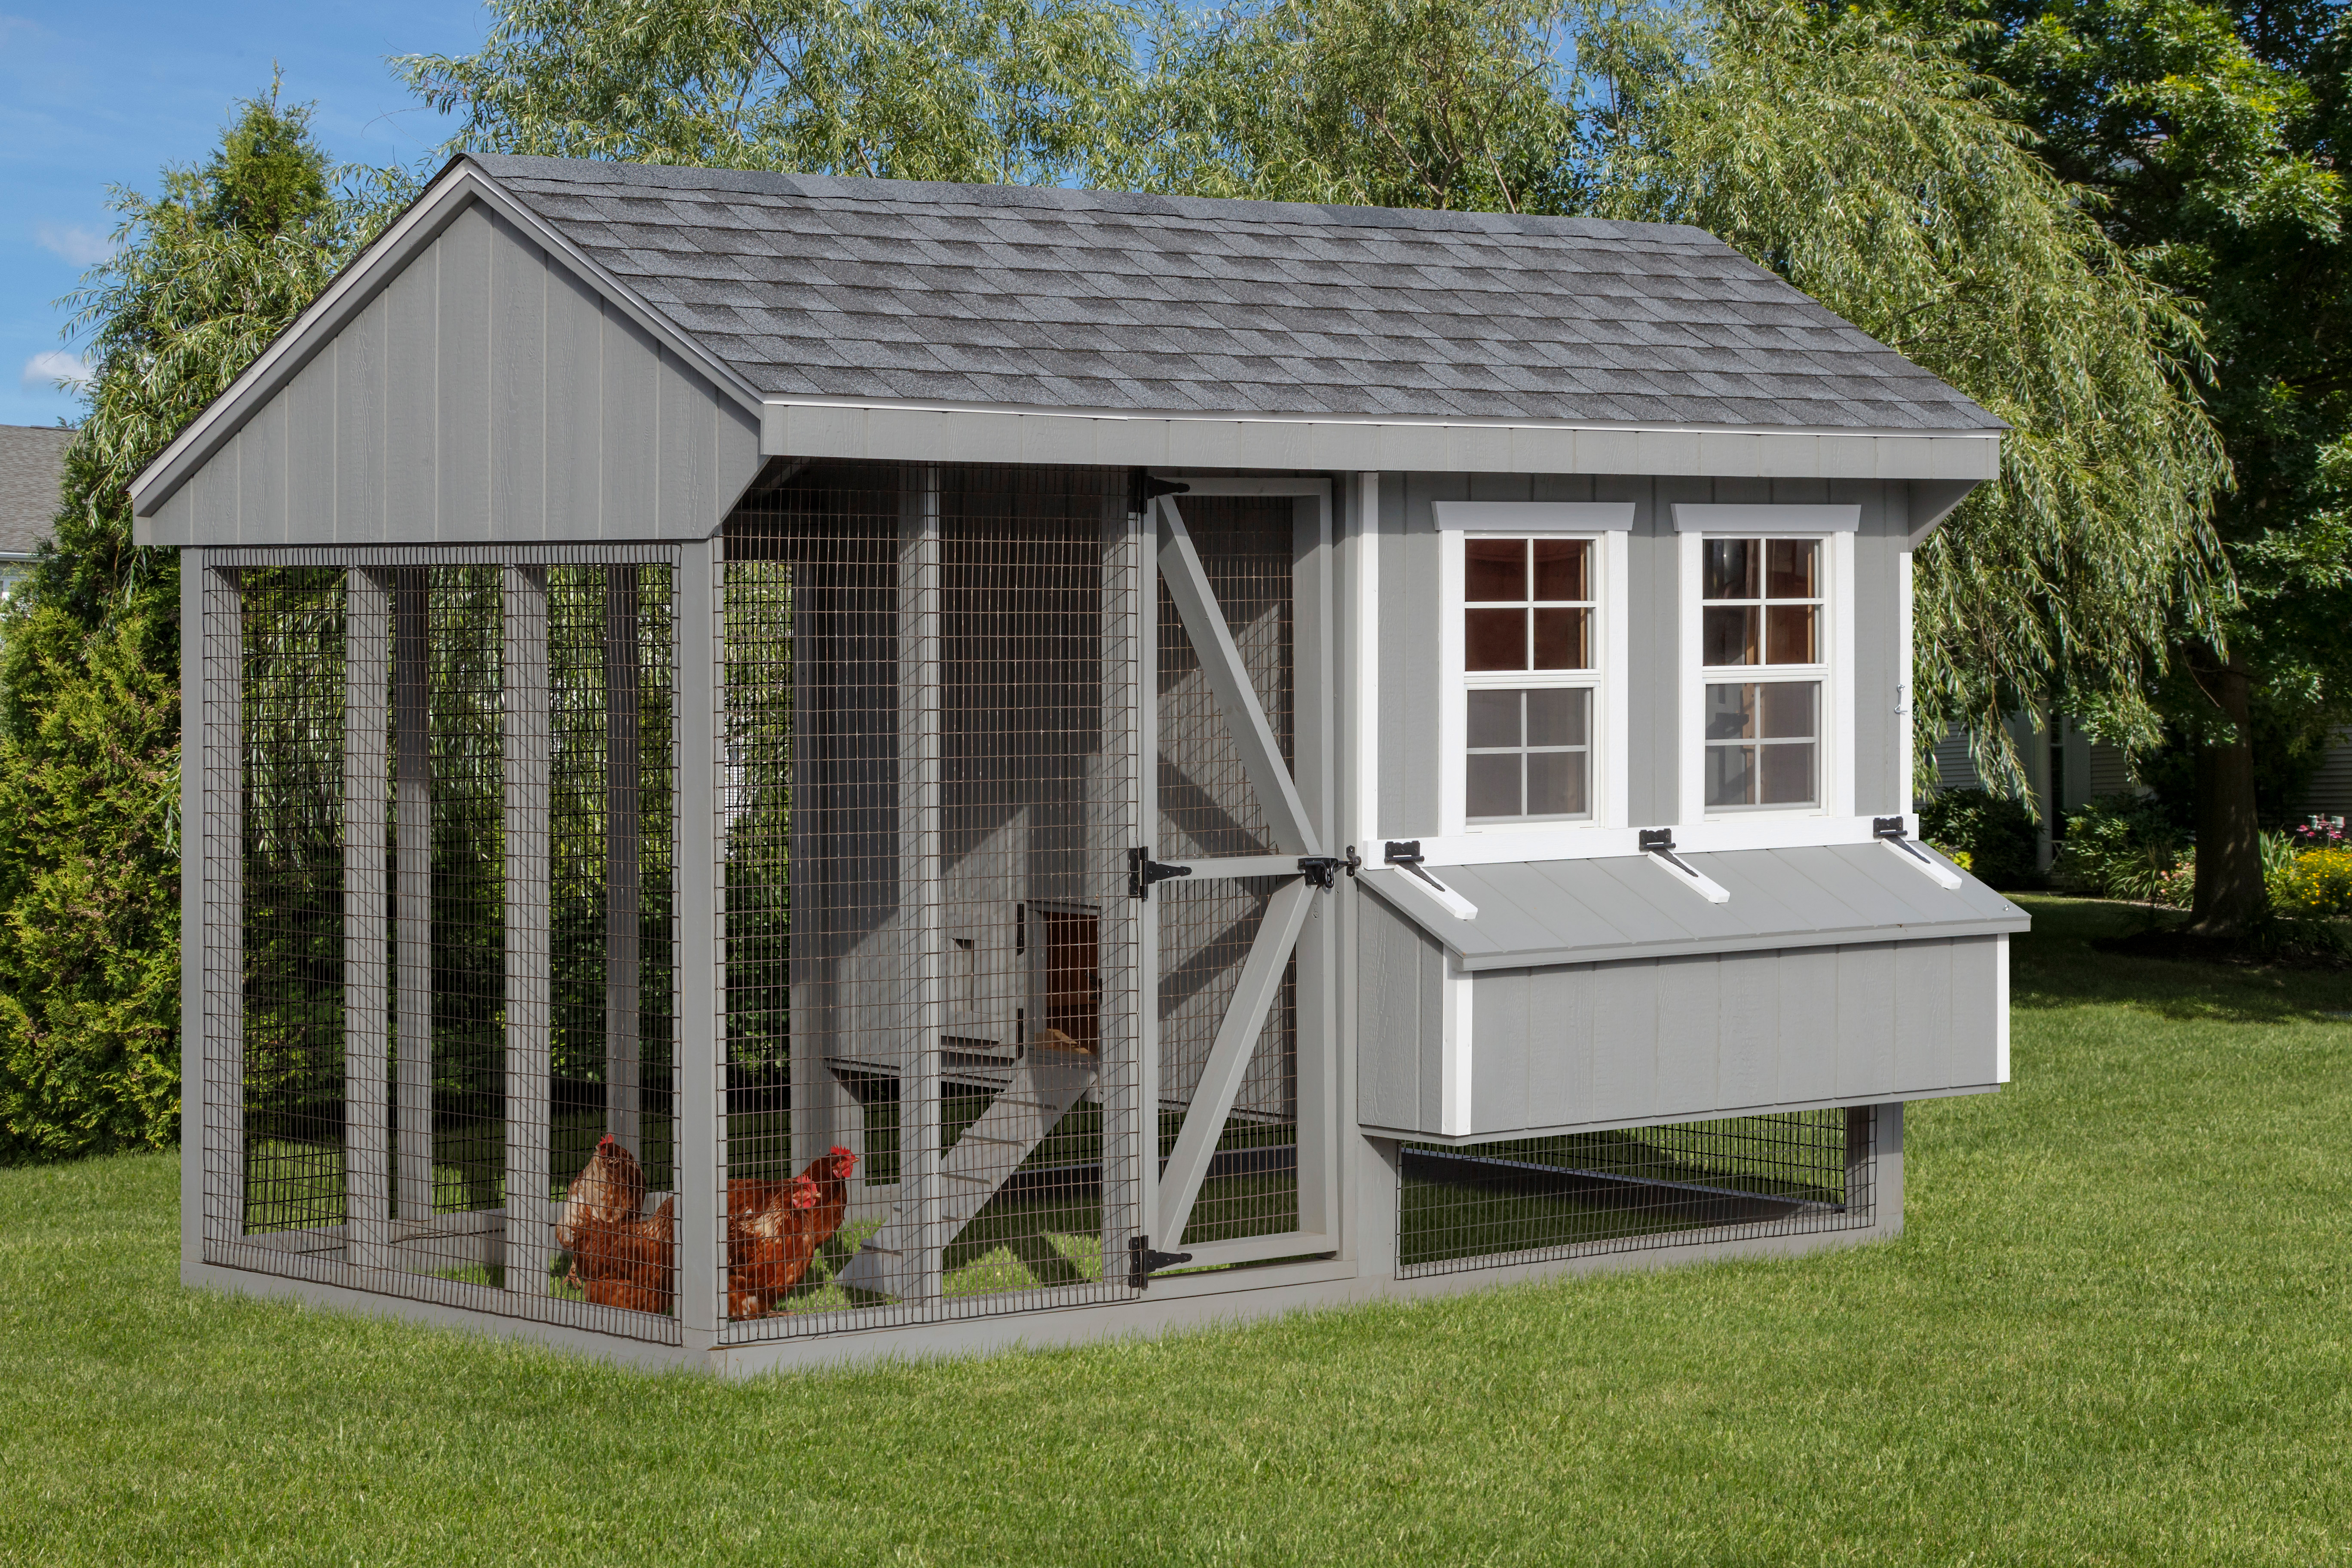 In-Stock Chicken Coops Sale - Ready to Ship | Buy Amish ...